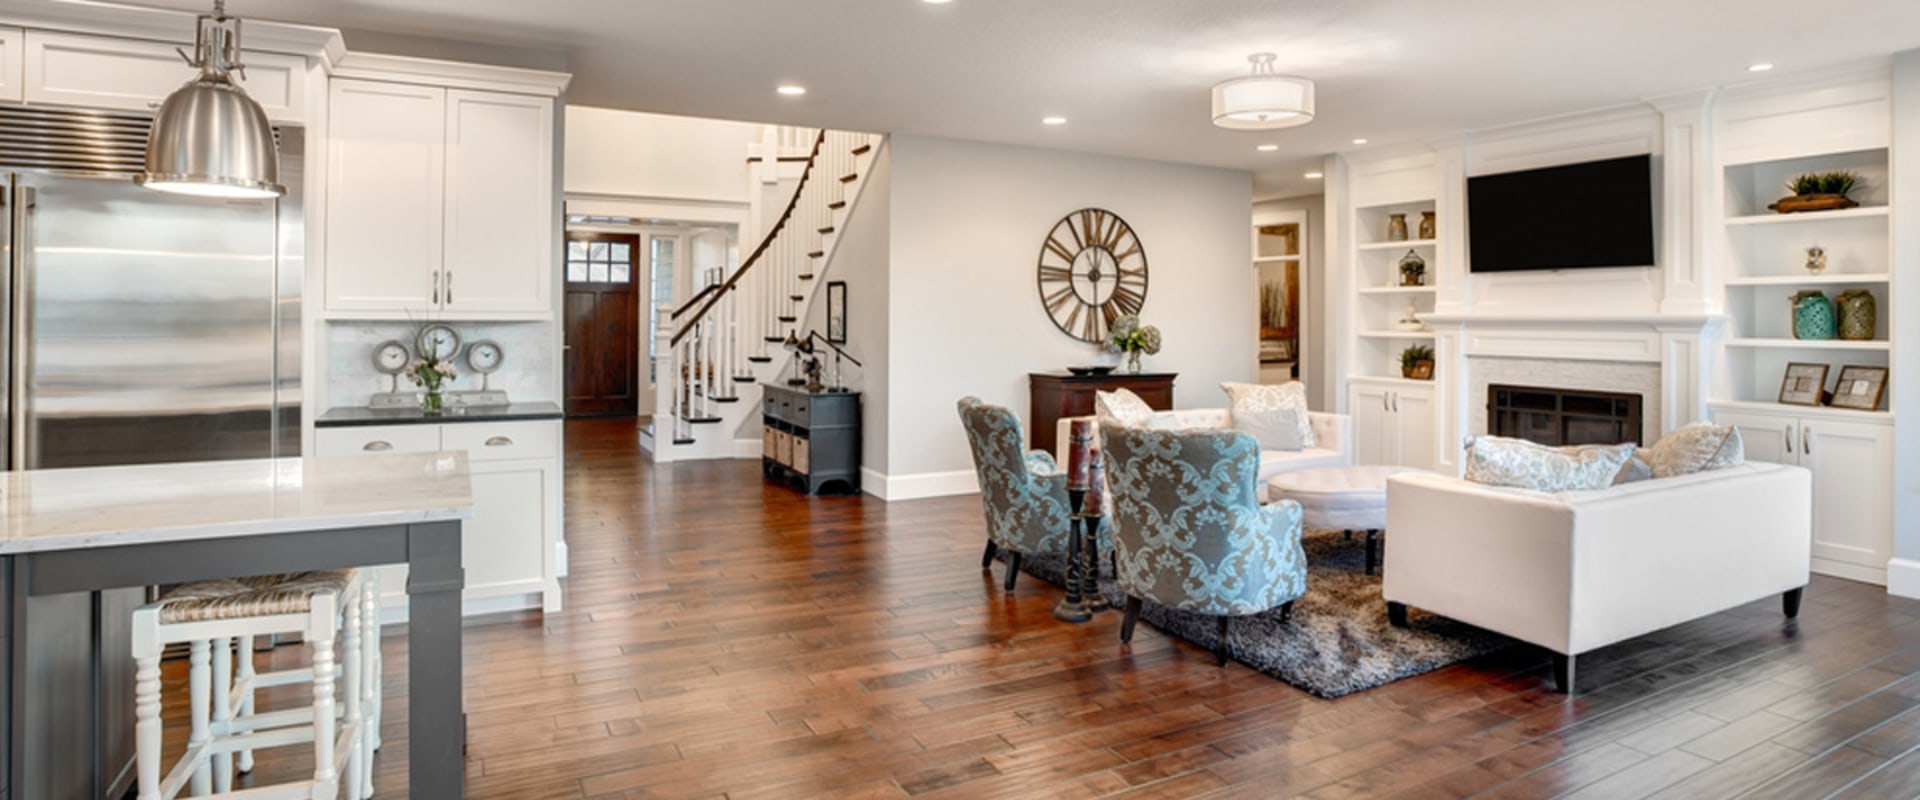 How much does it cost to install 2000 square feet of hardwood floors?